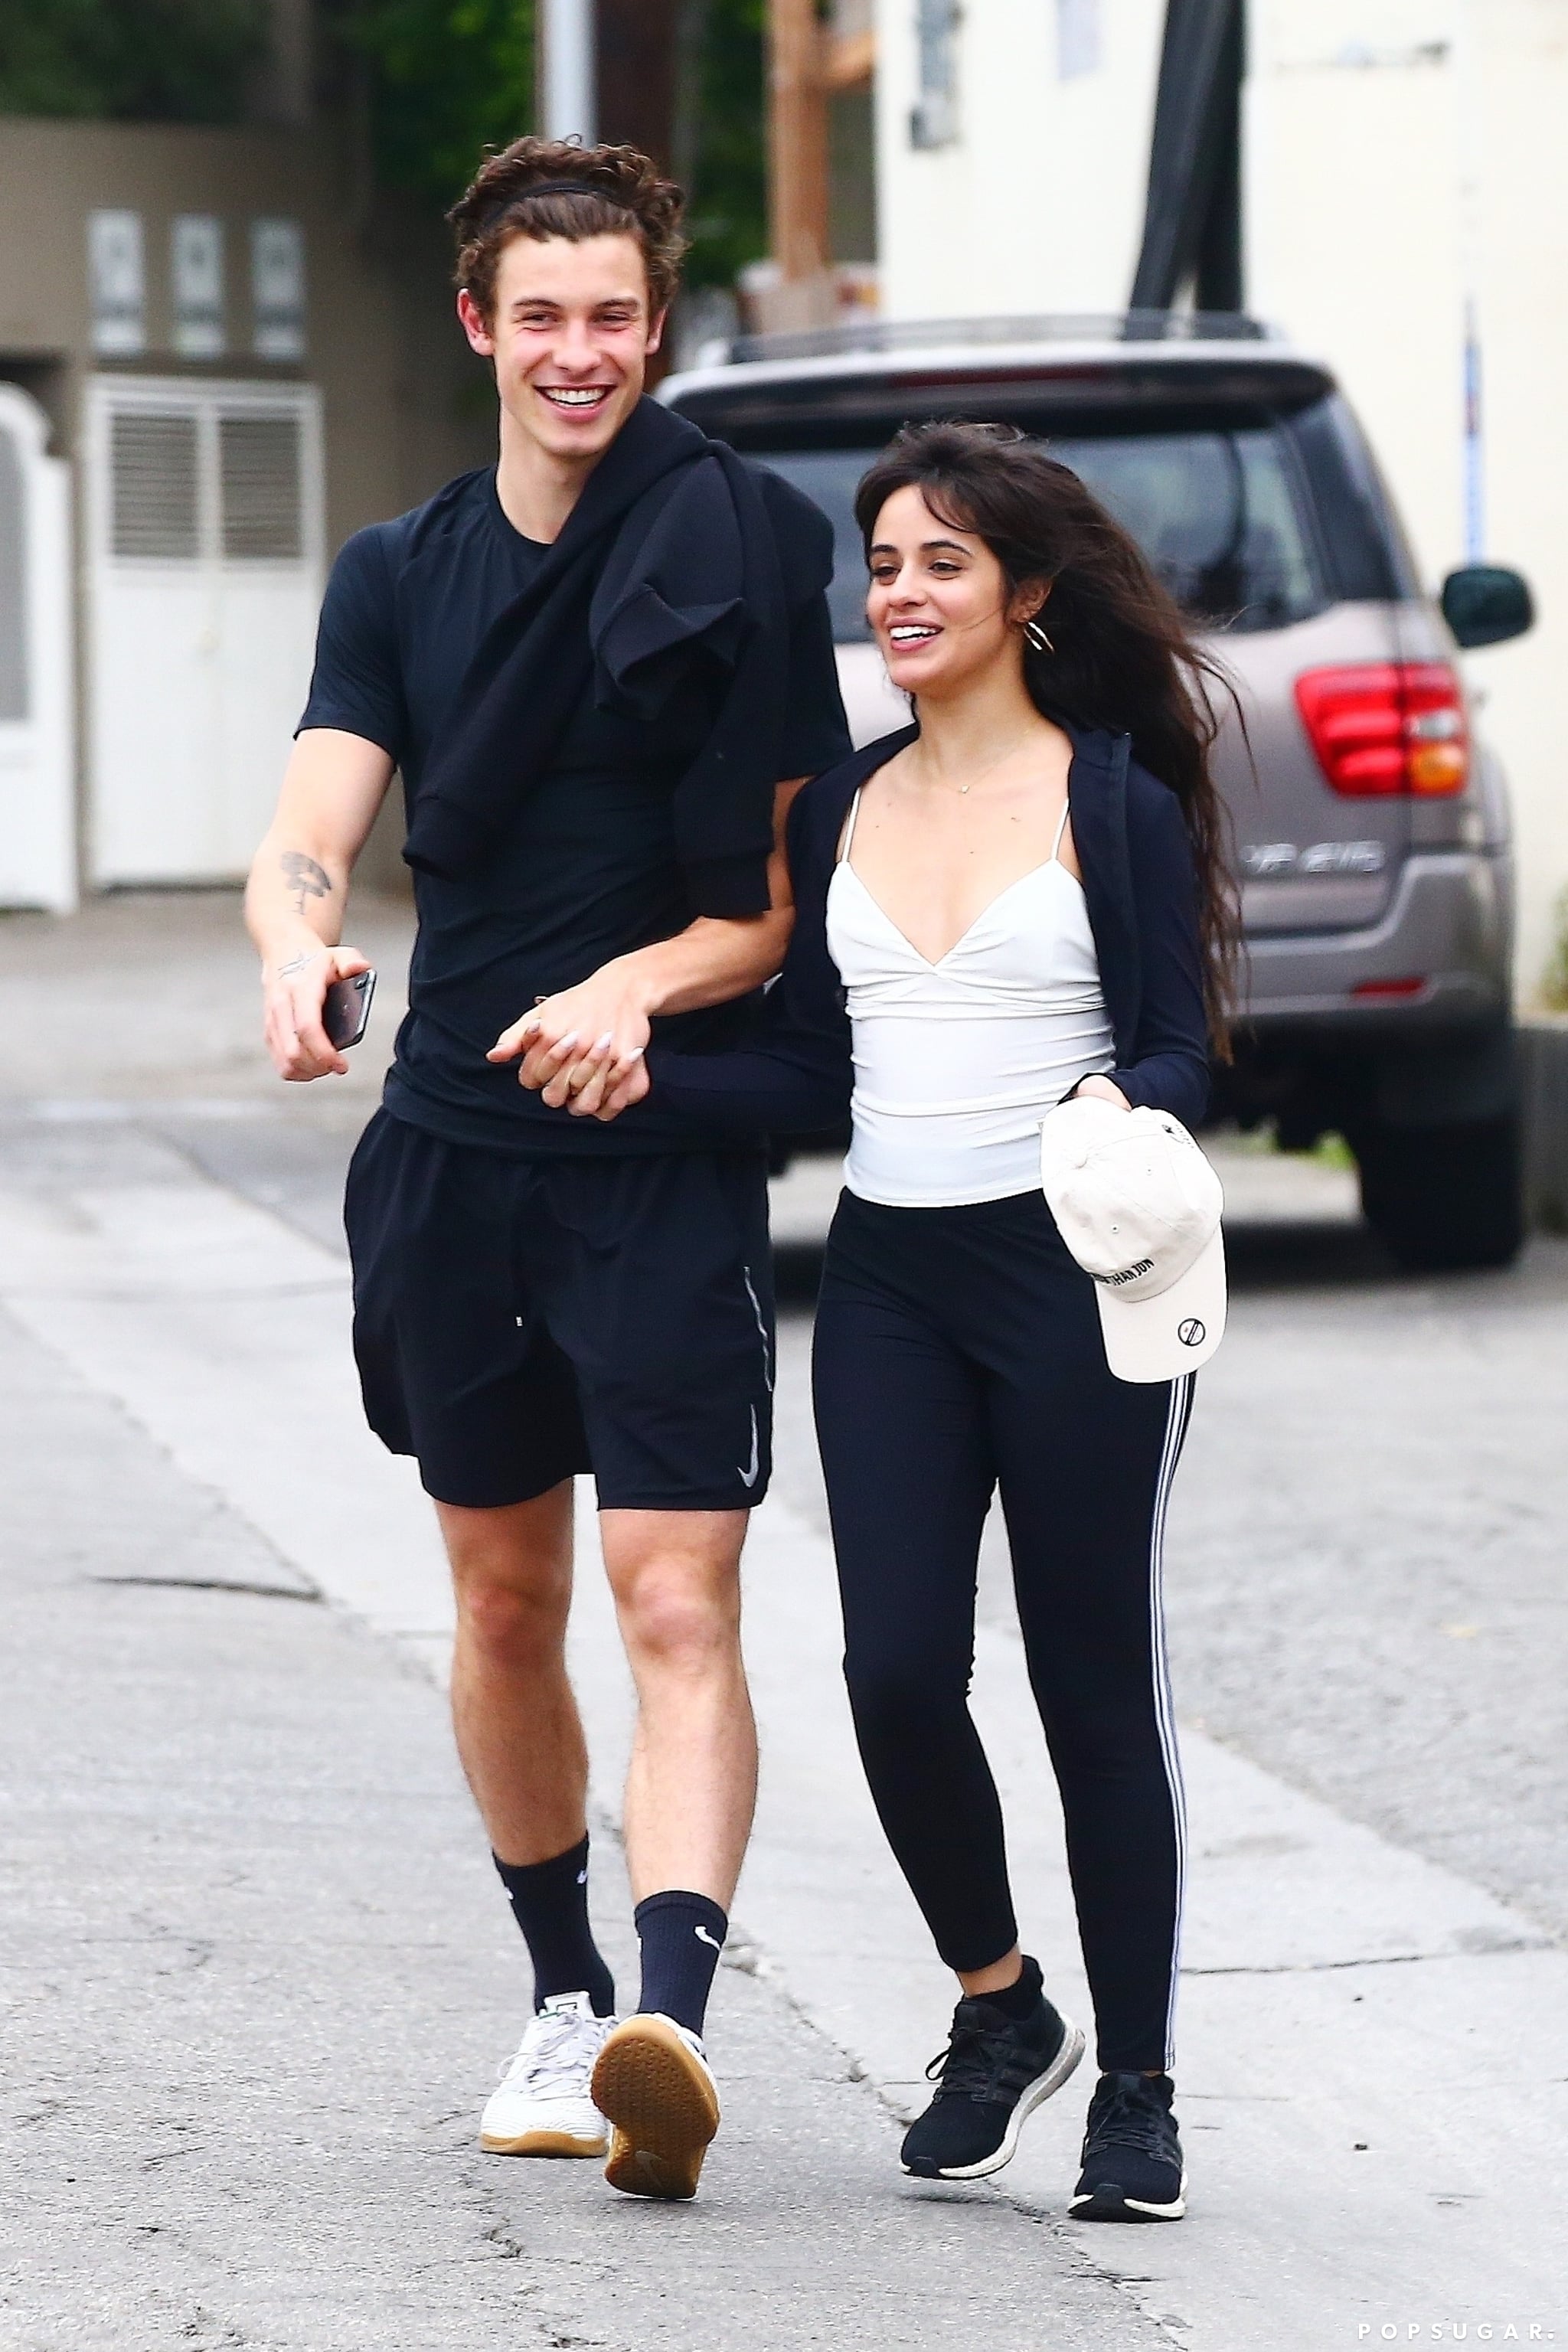 How Tall Are Shawn Mendes And Camila Cabello Popsugar Celebrity